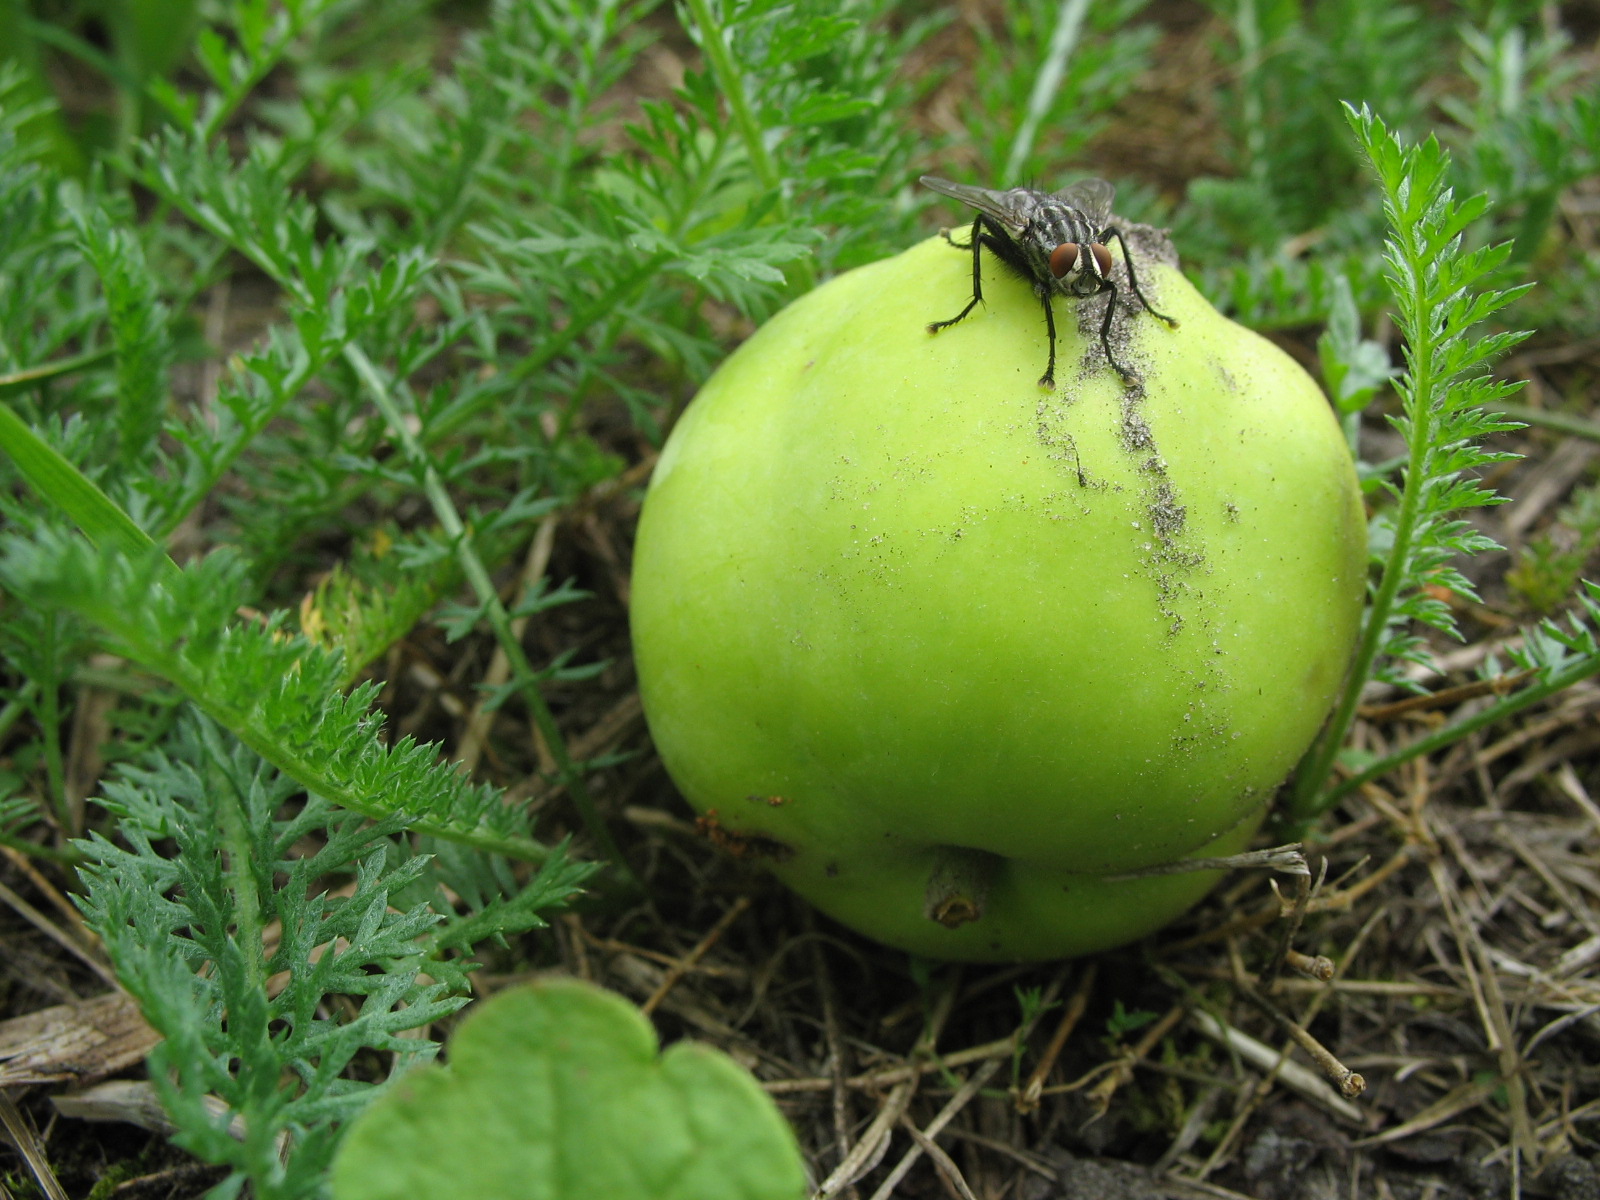 partyboy fly insect on aple green fruit